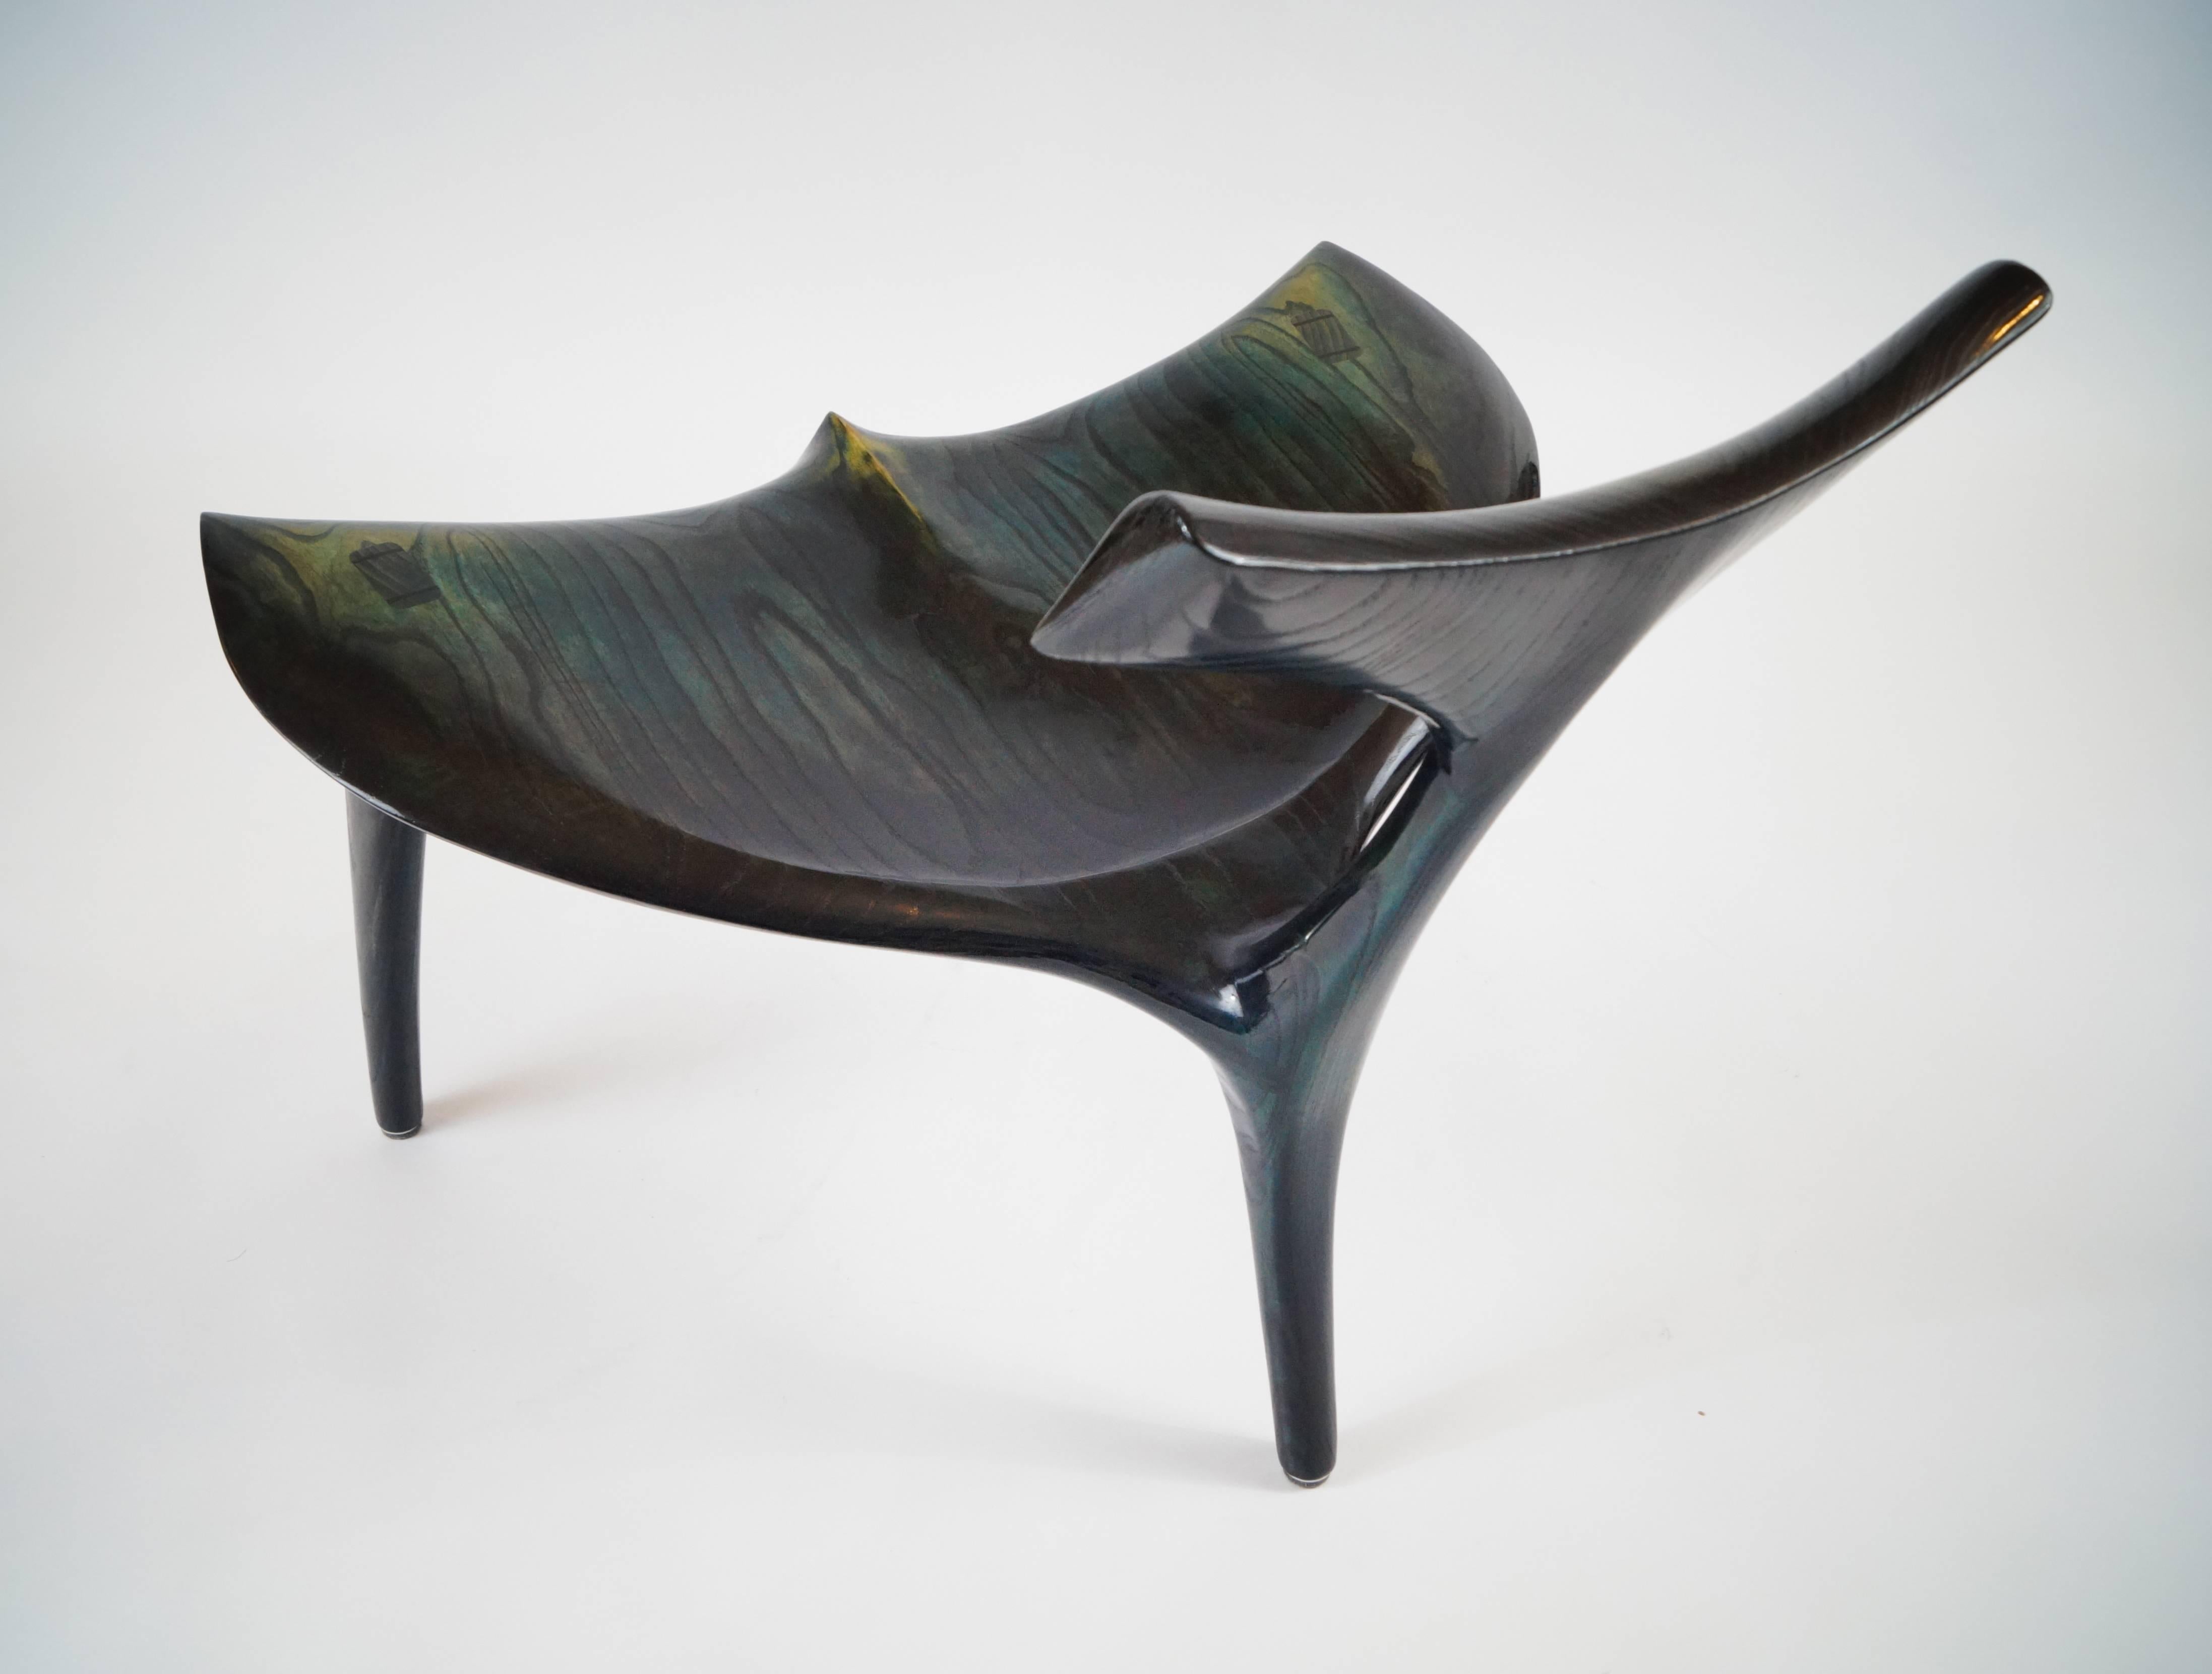 Danish Art Whale Chair MS82 Handcrafted and Designed by Morten Stenbaek